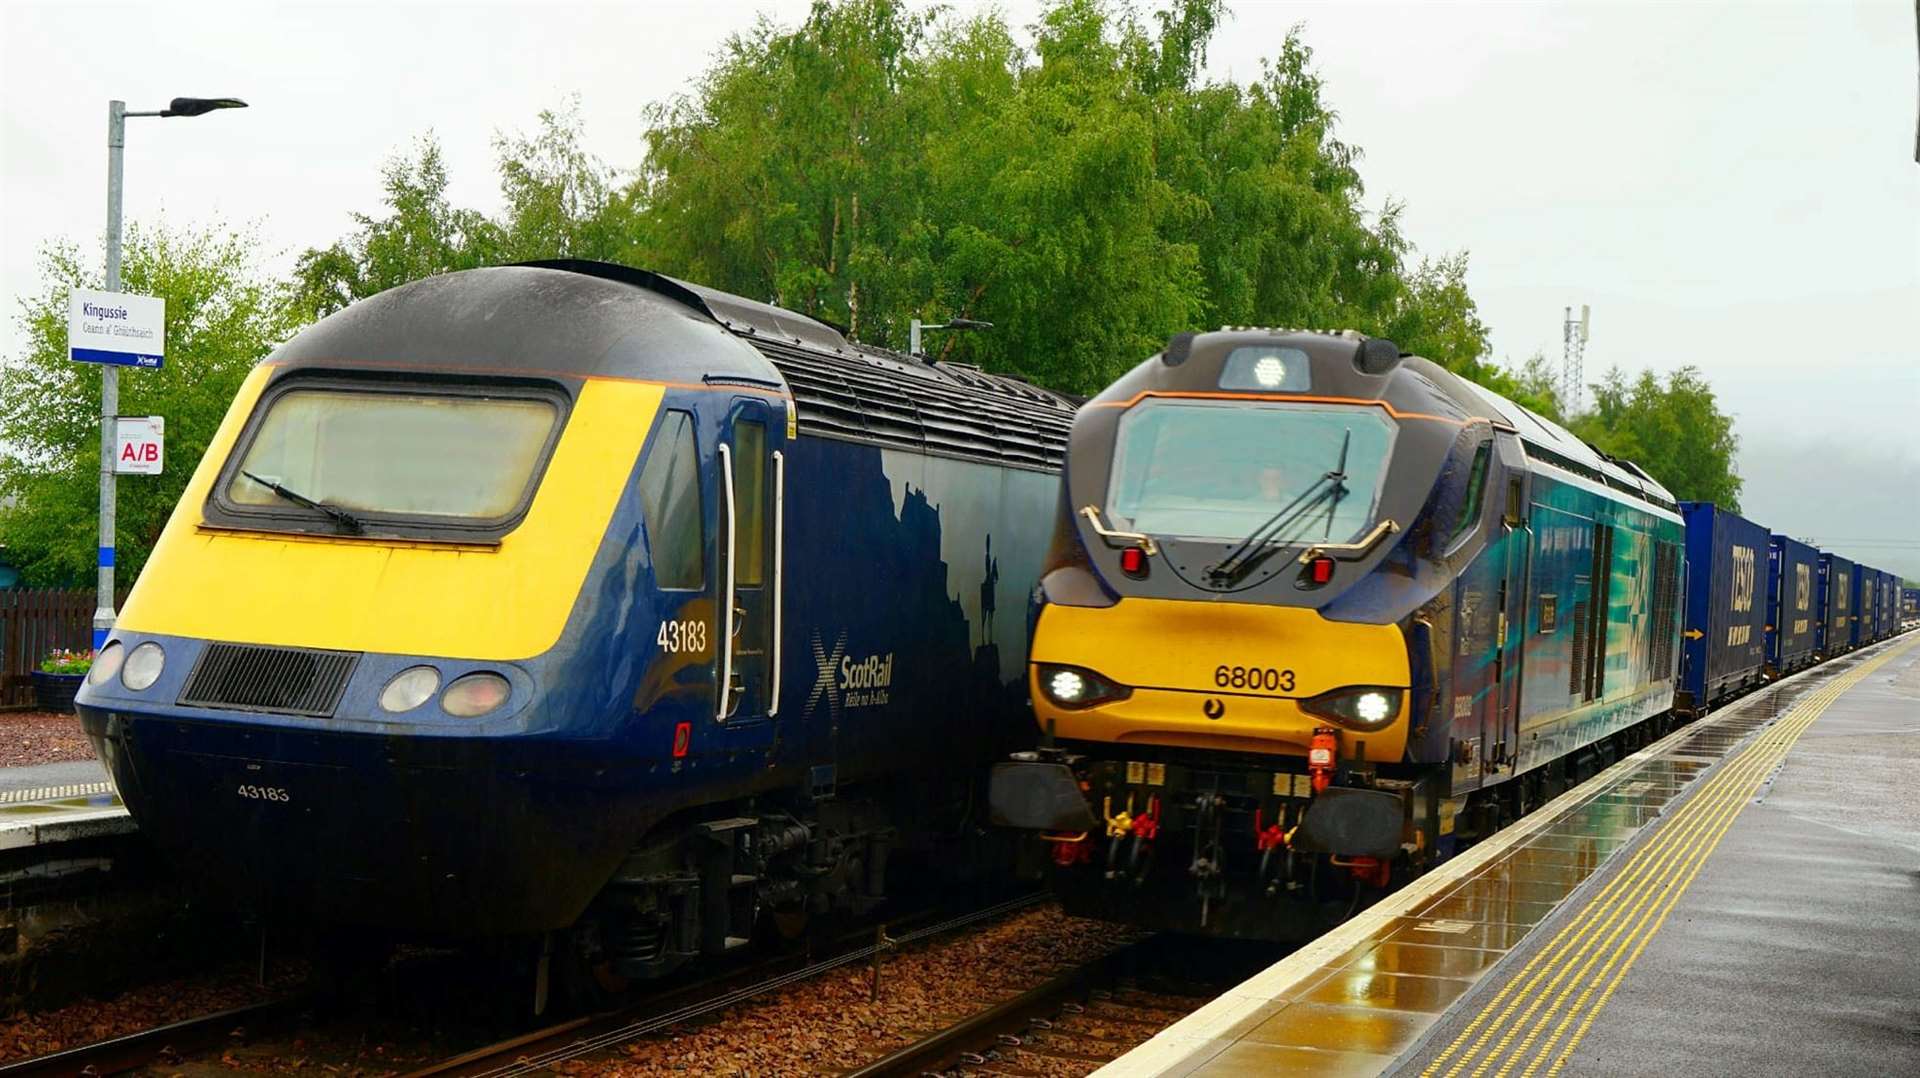 Services between Inverness and Perth are likely to be severely disrupted.